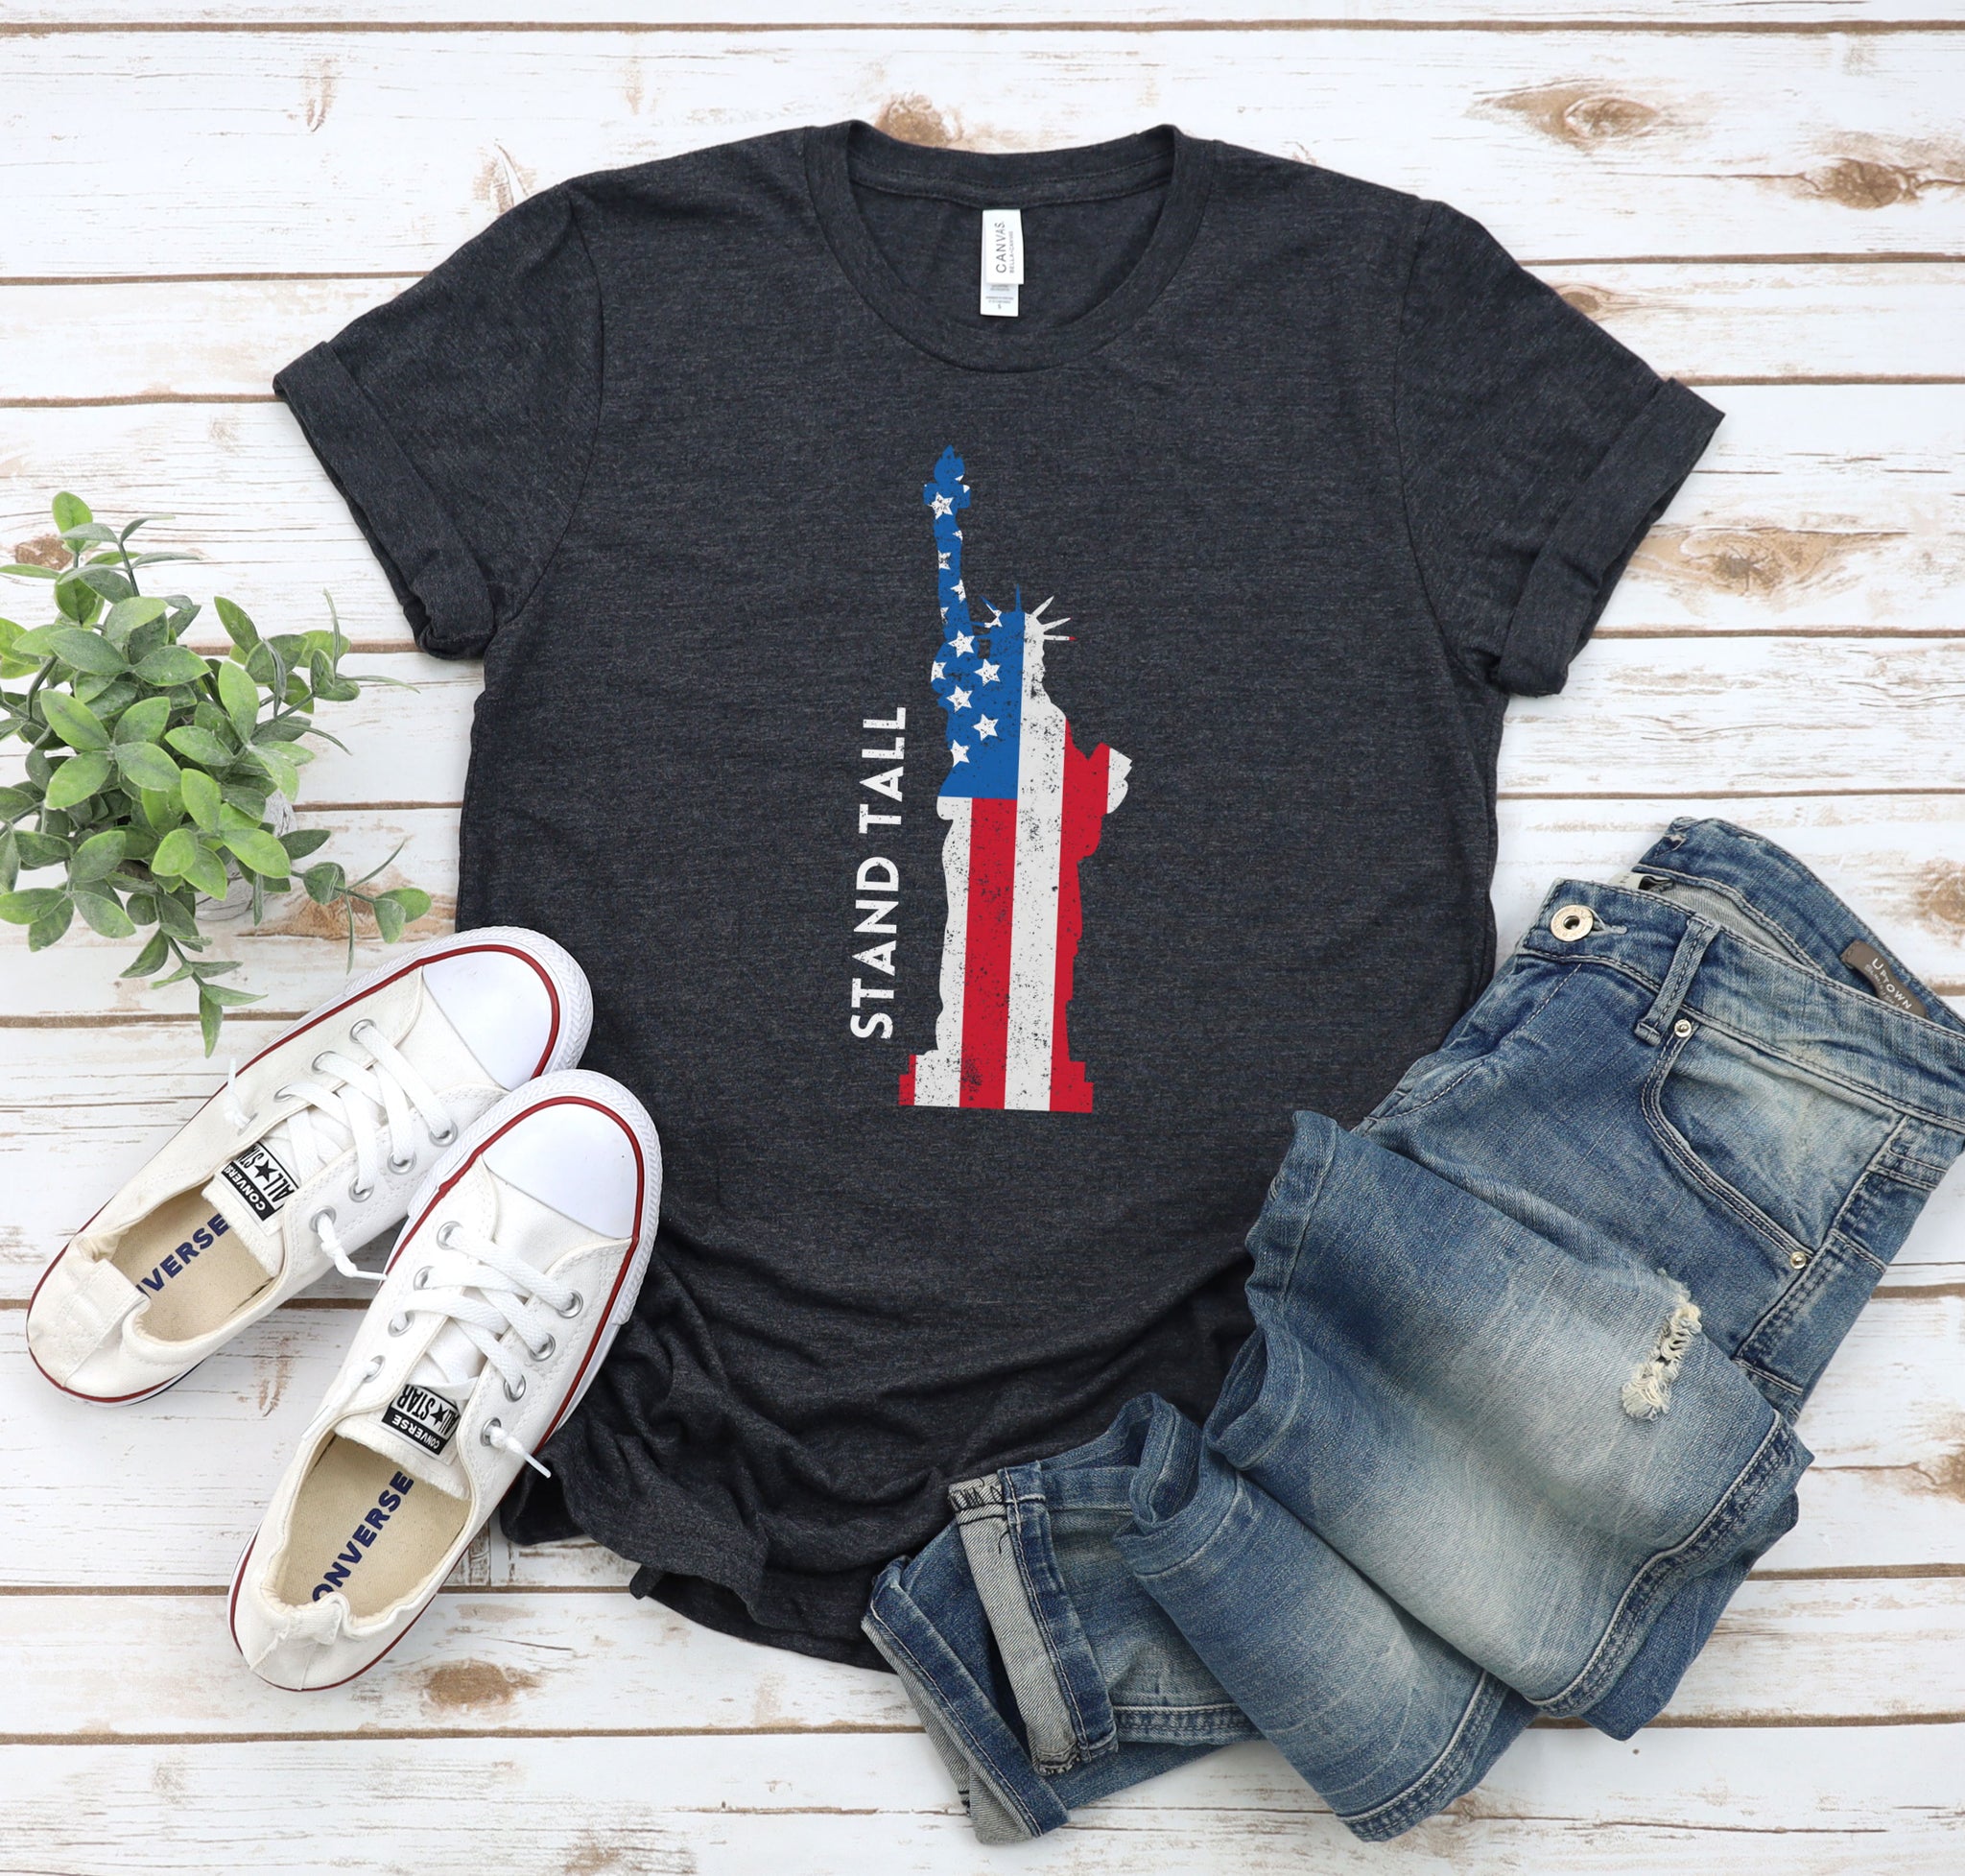 Stand tall Statue of Liberty t-shirt for patriotic holidays.